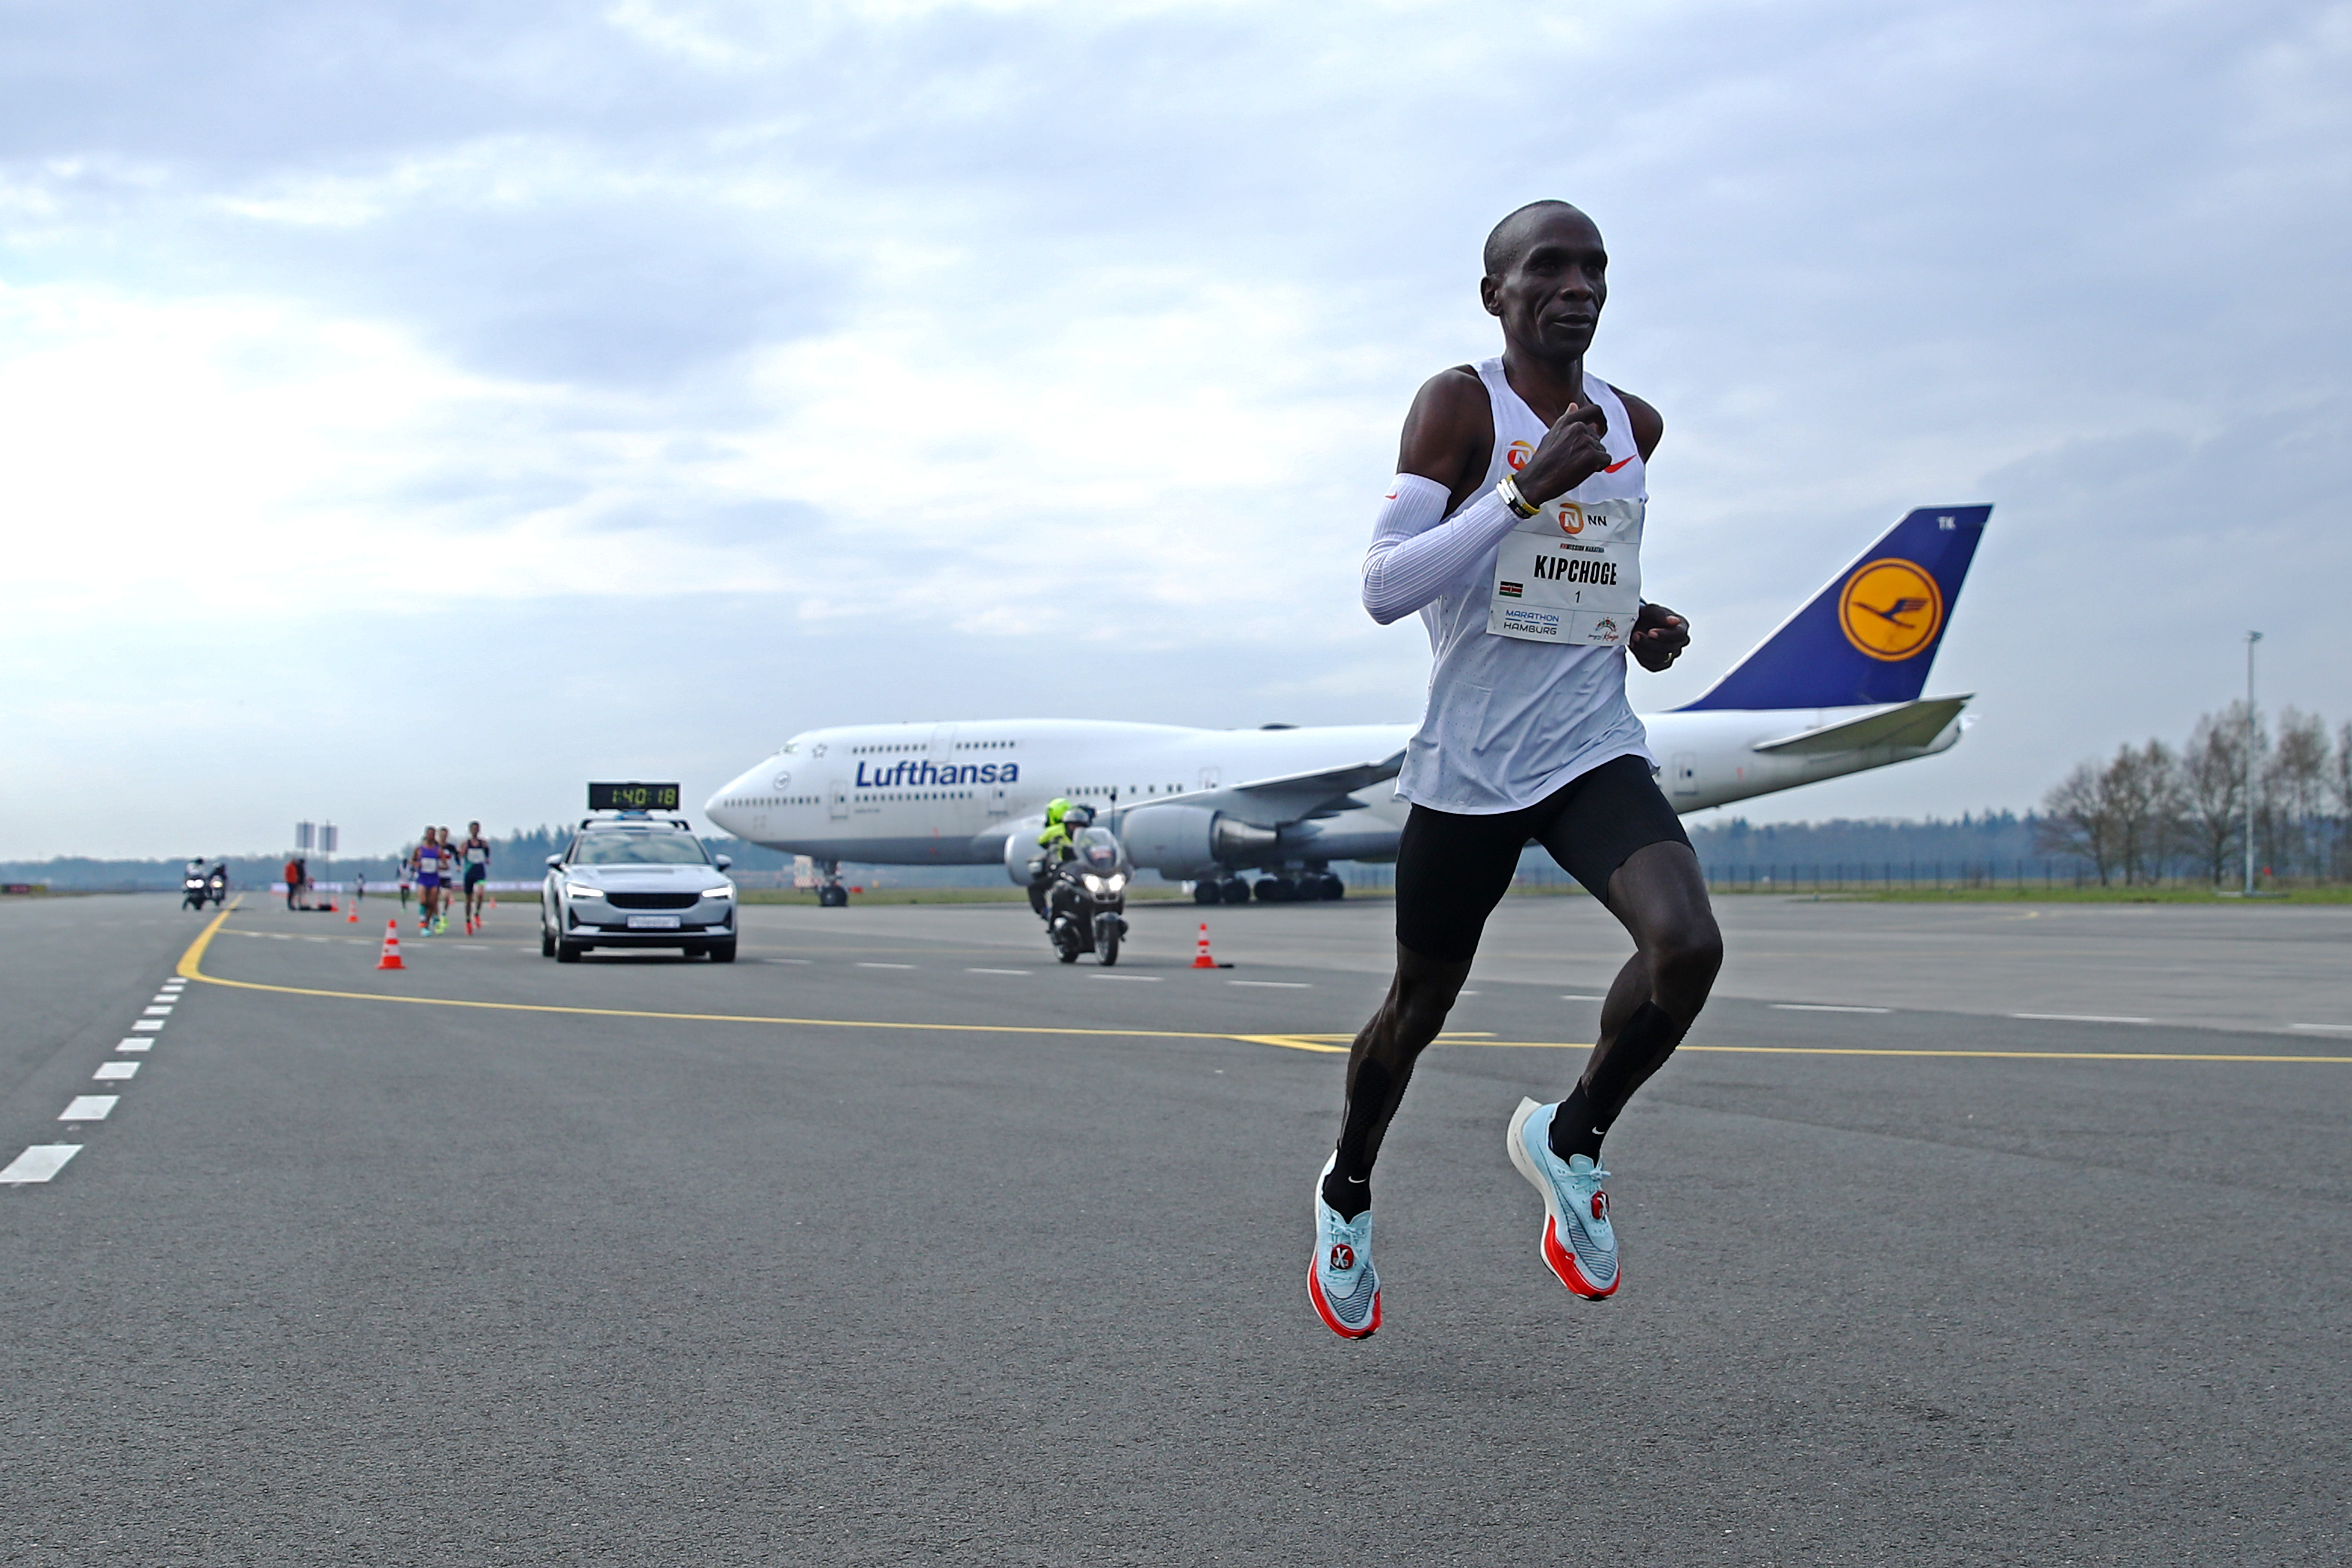 Eliud Kipchoge of Kenya winner of the gold medal competes during the NN Mission Marathon held at Airport or Vliegveld Twente on April 18, 2021 in Enschede, Netherlands.